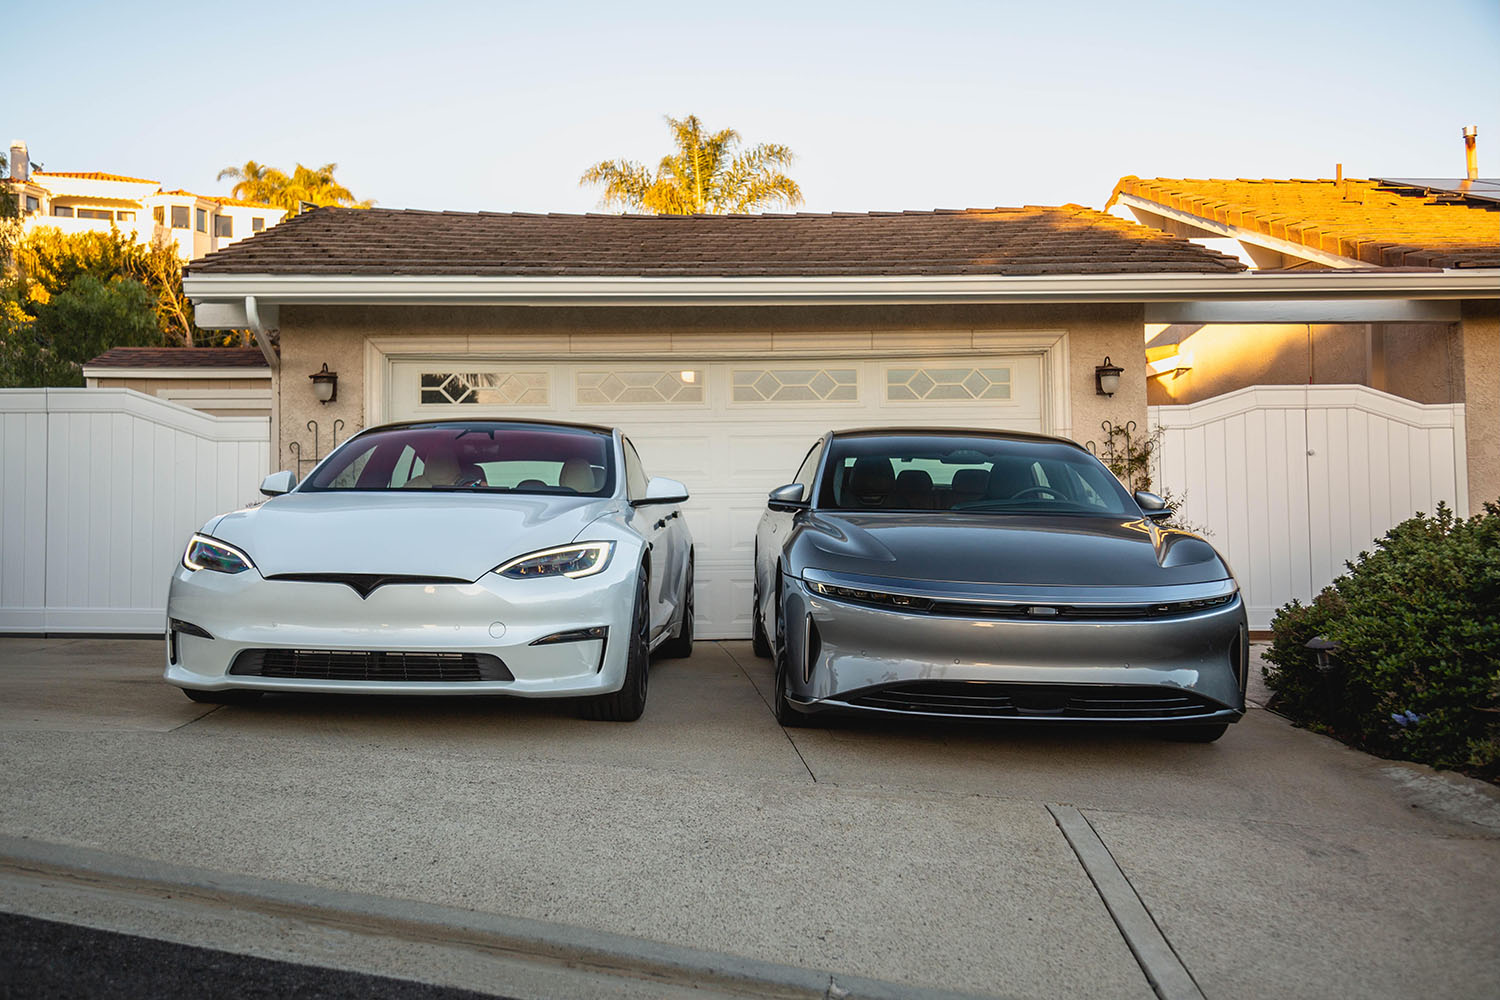 Two electric vehicles parked in a driveway in Southern California